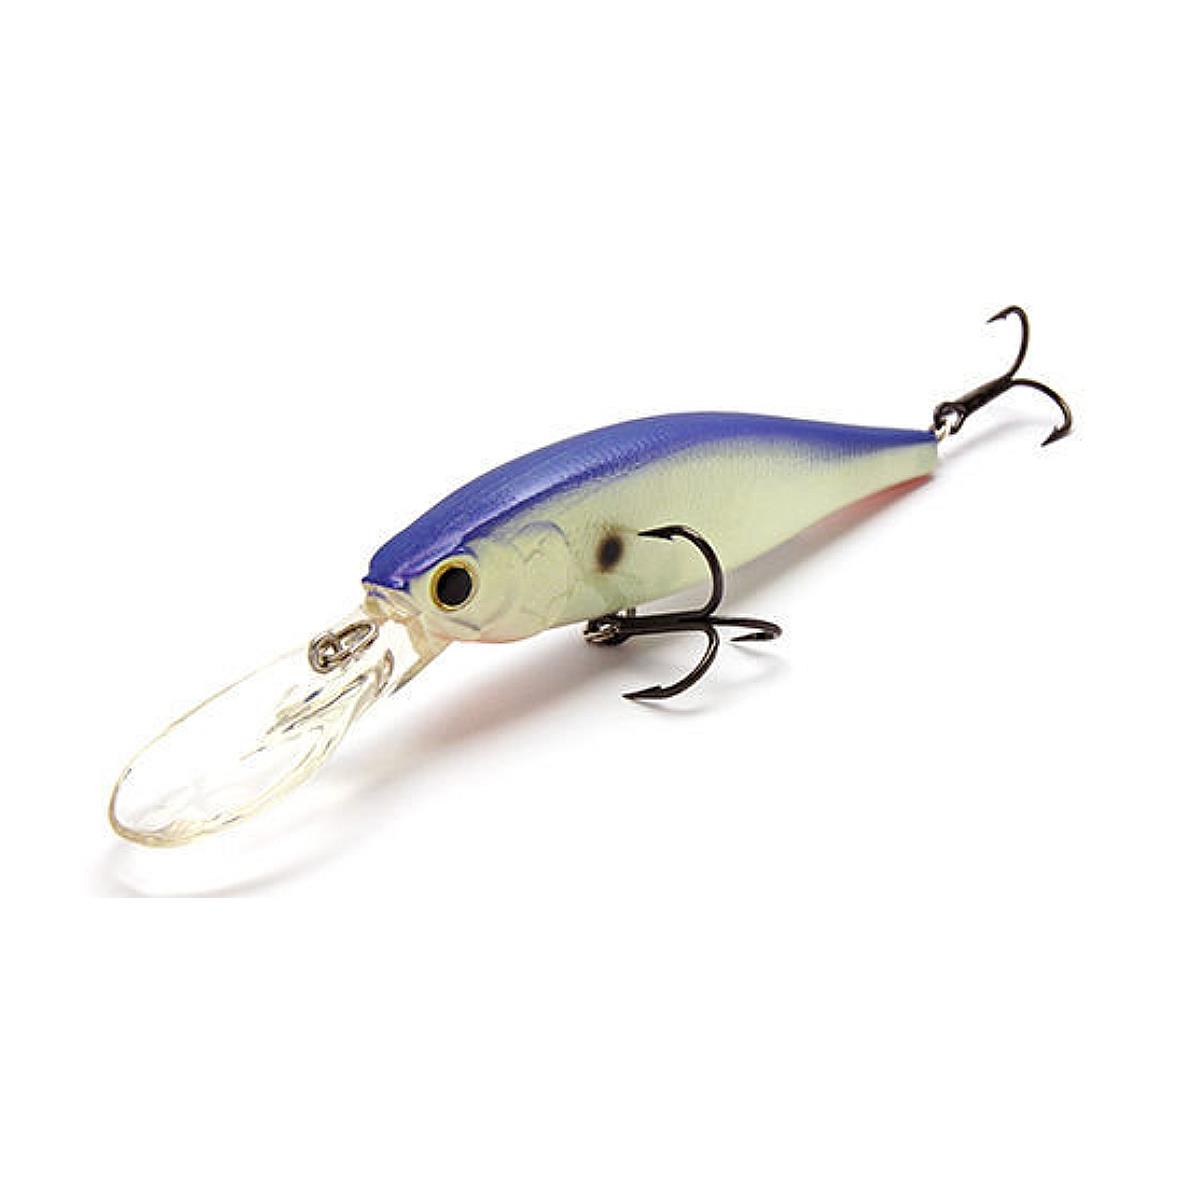 Воблер Pointer 100DD-261 Table Rock Shad Lucky Craft воблер pointer 100dd 261 table rock shad lucky craft